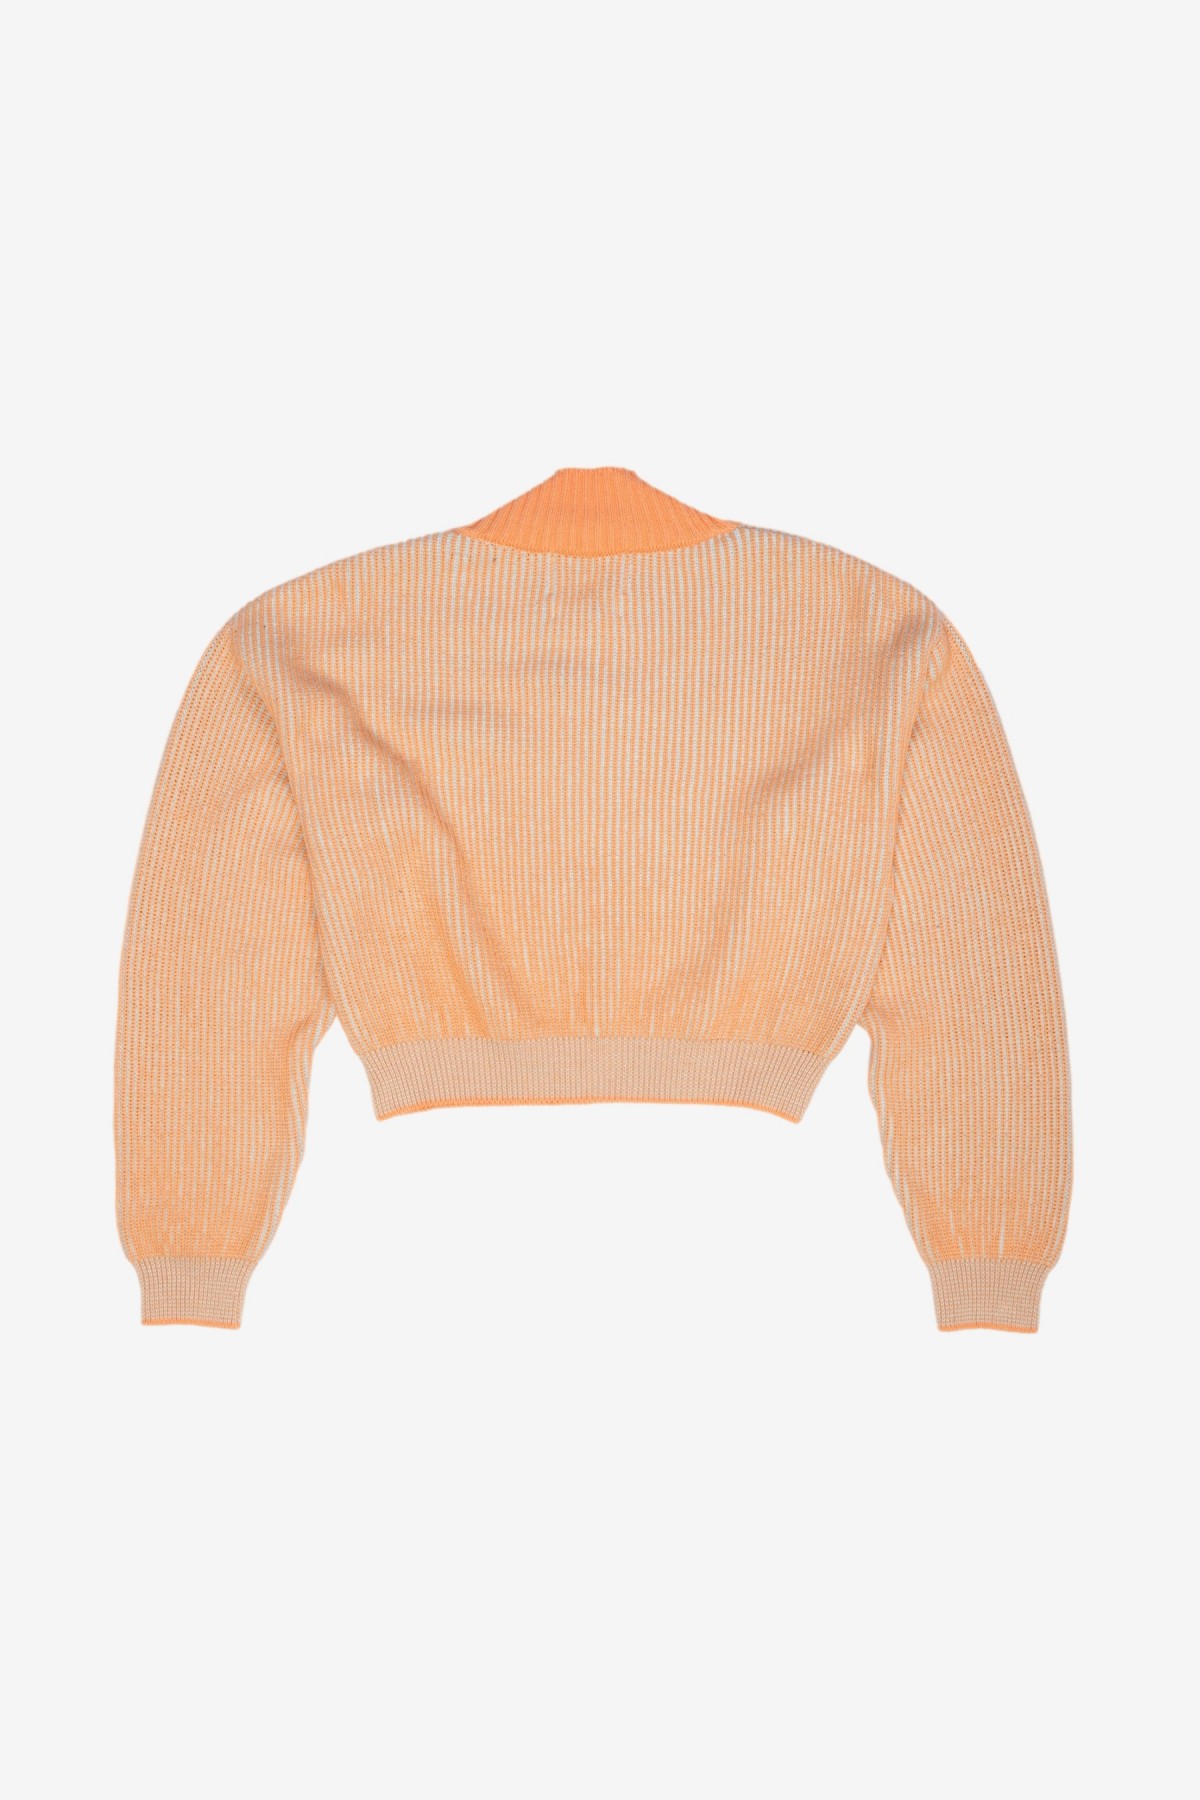 Valentine Witmeur Commercialist Ter Sweater in Salmon/Blue